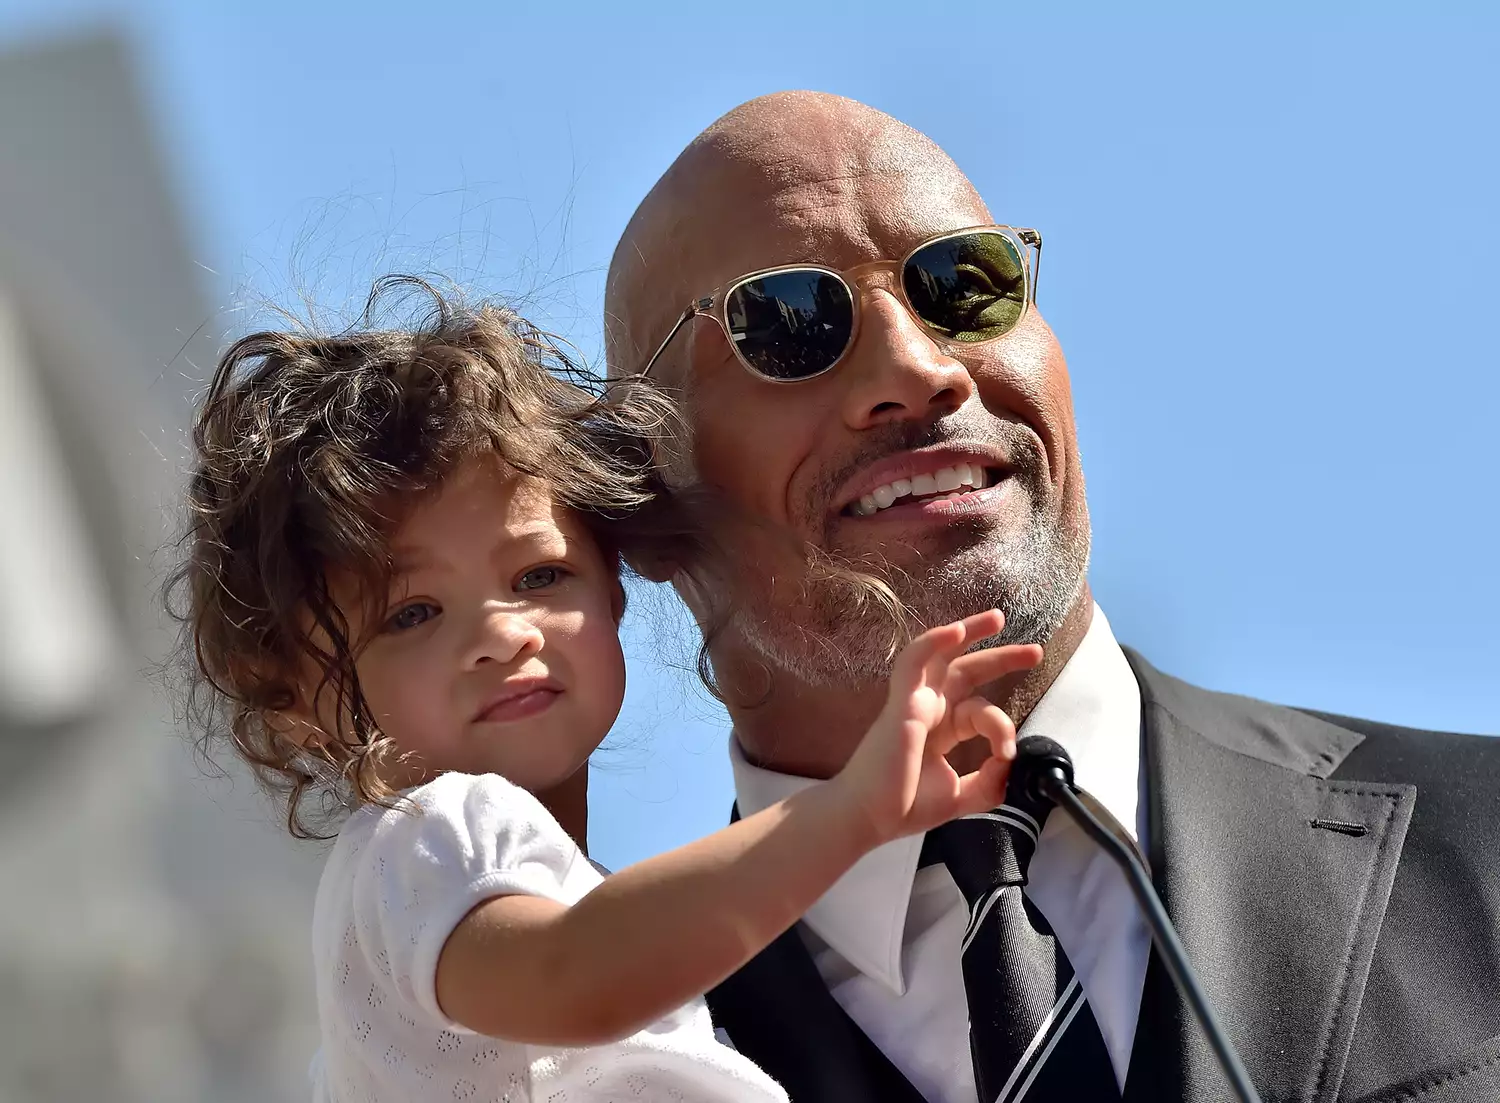 Dwayne Johnson and daughter Jasmine Johnson attend the ceremony honoring Dwayne Johnson with star on the Hollywood Walk of Fame on December 13, 2017 in Hollywood, California